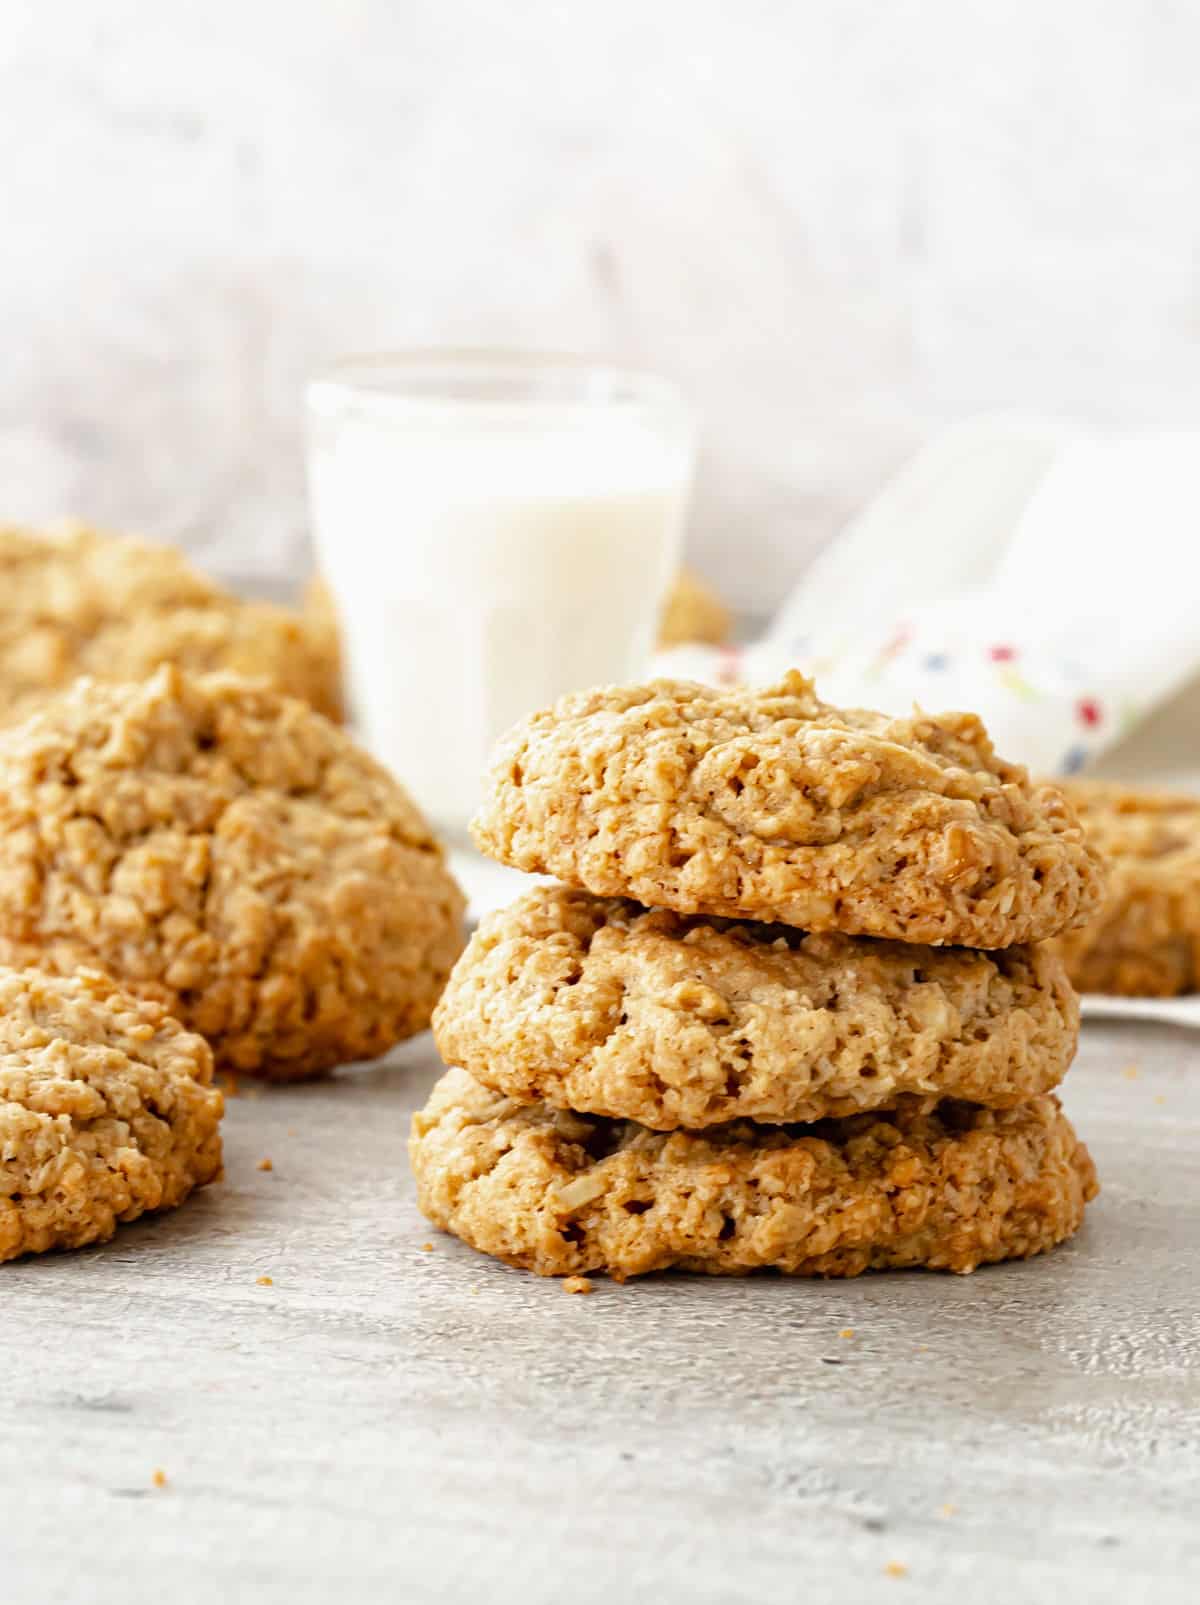 Stack of three oatmeal cookies on a grey surface with glass of milk and other cookies in background.